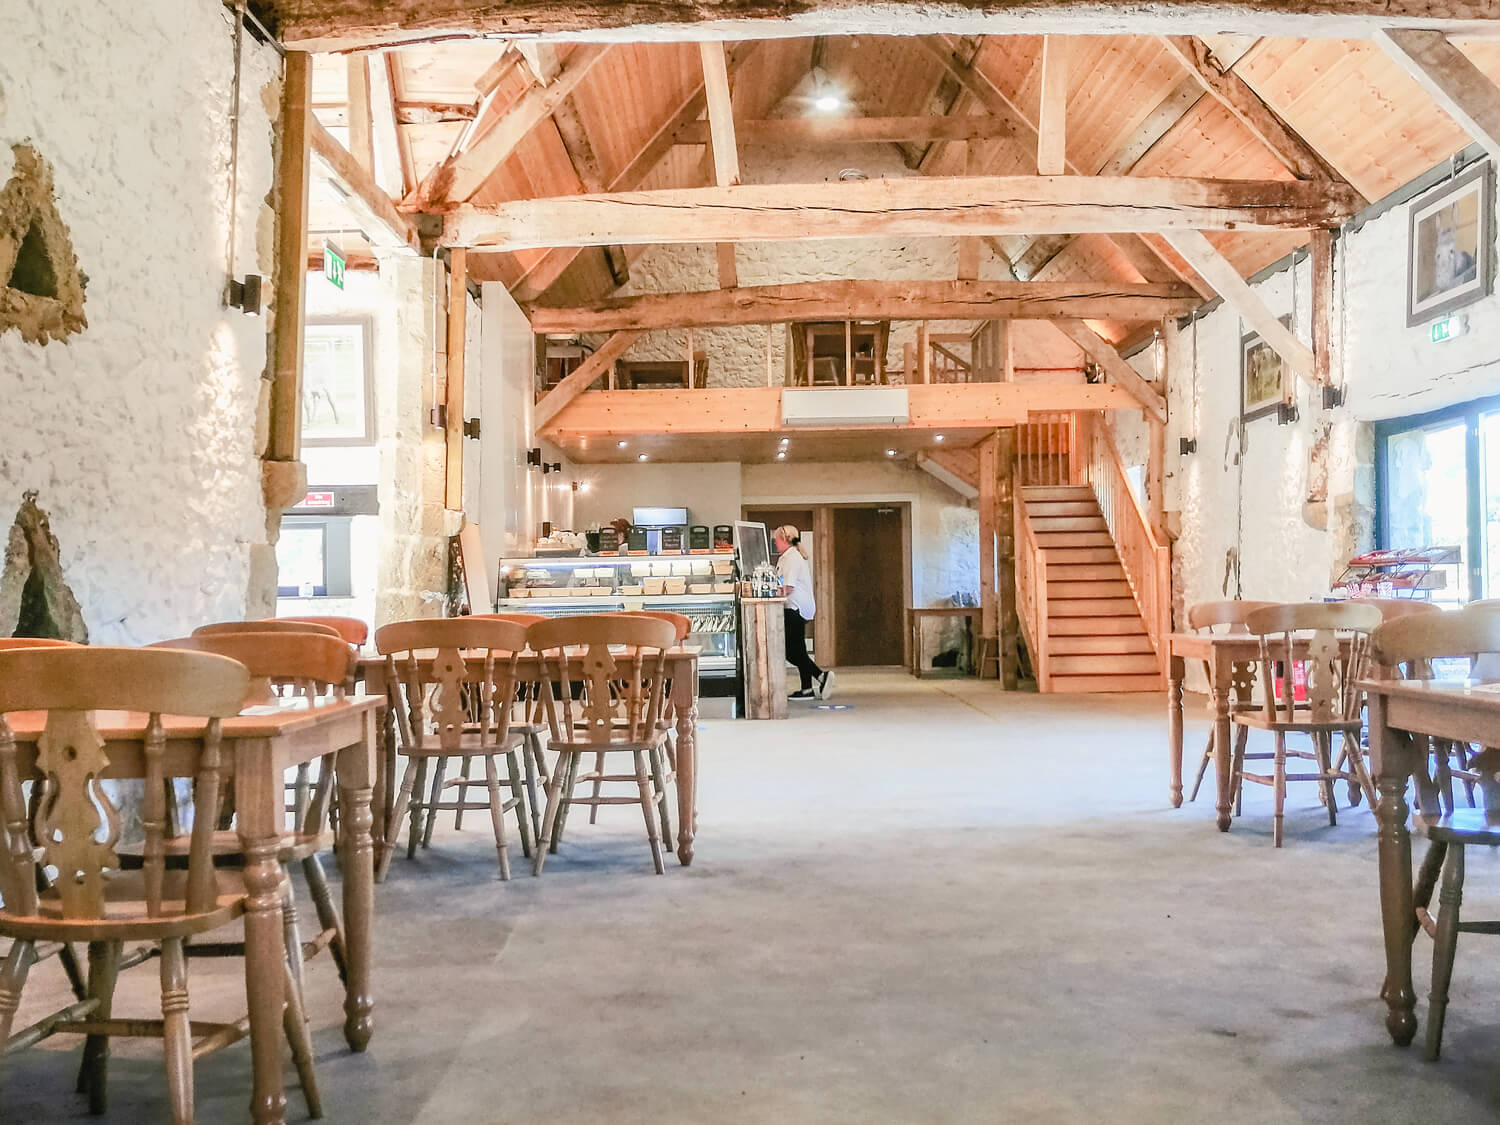 After the barn conversion in Grazers Cafe at the Isle of Wight Donkey Sanctuary